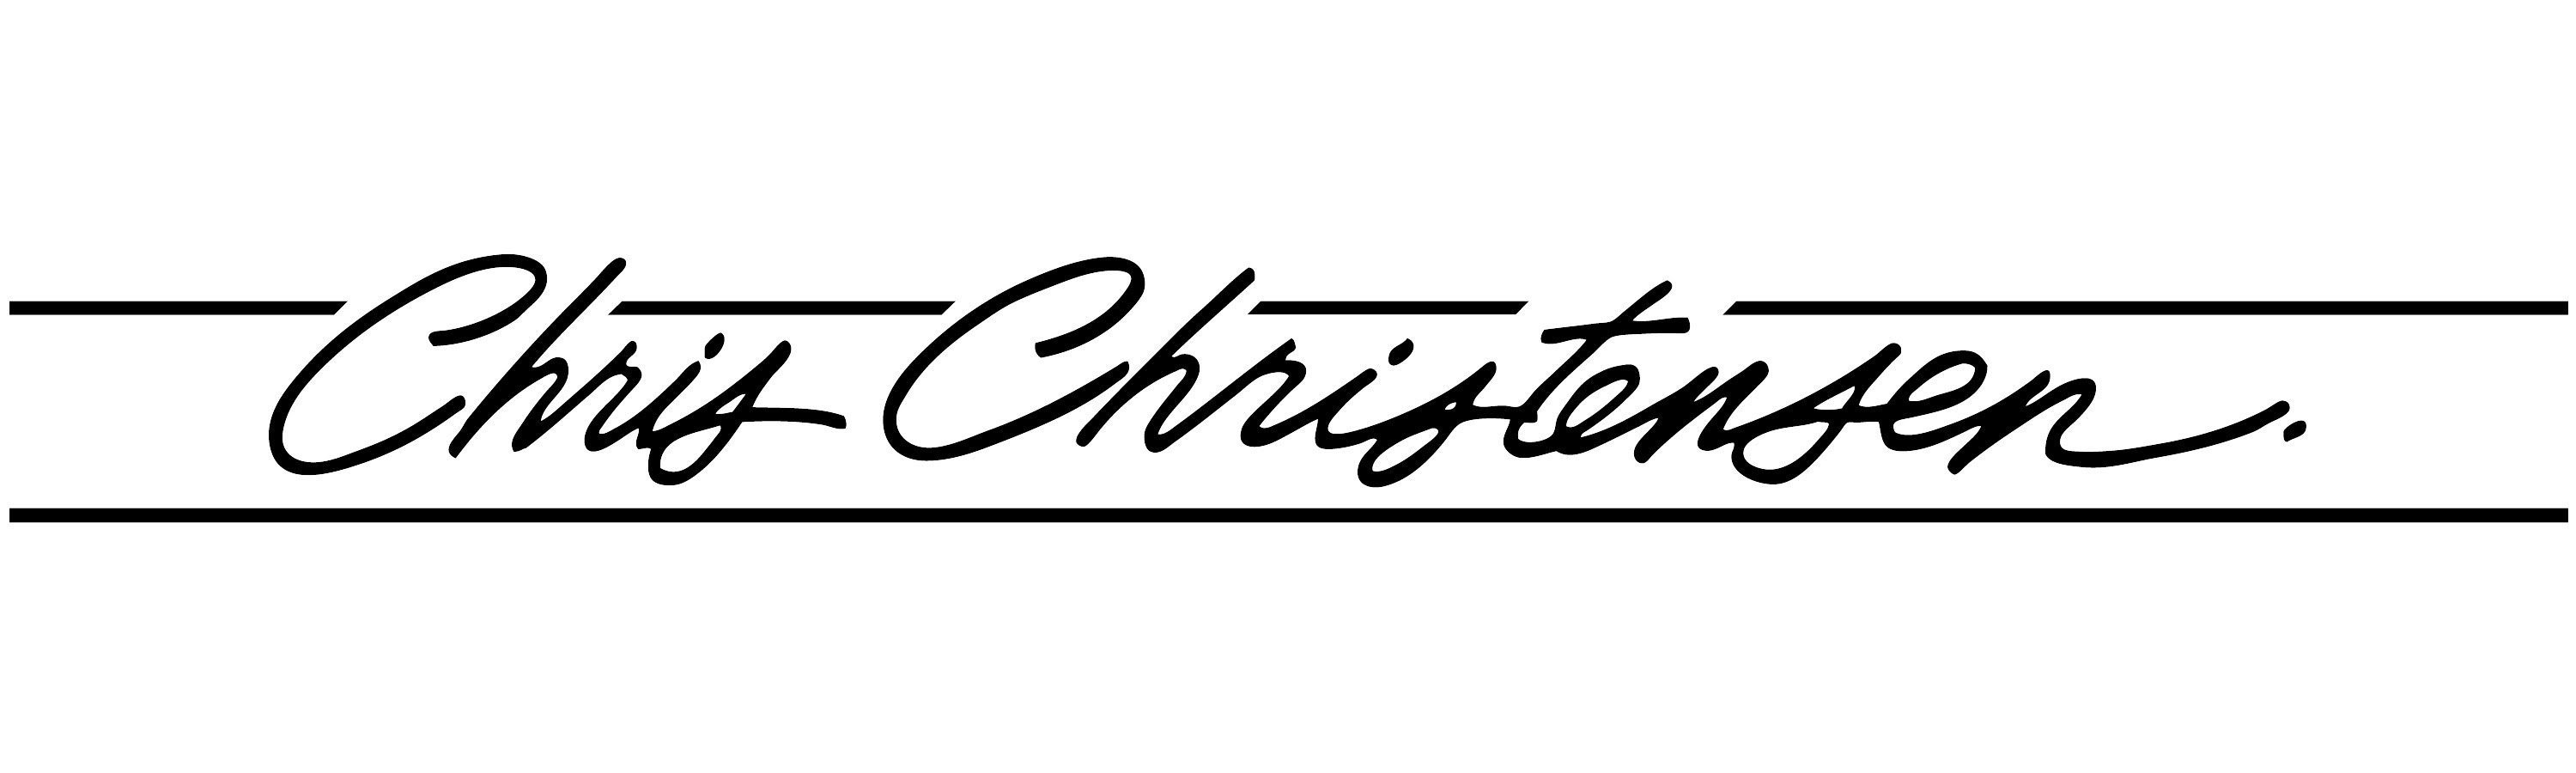 Chris Christensen logo. Professional Dog Grooming Products